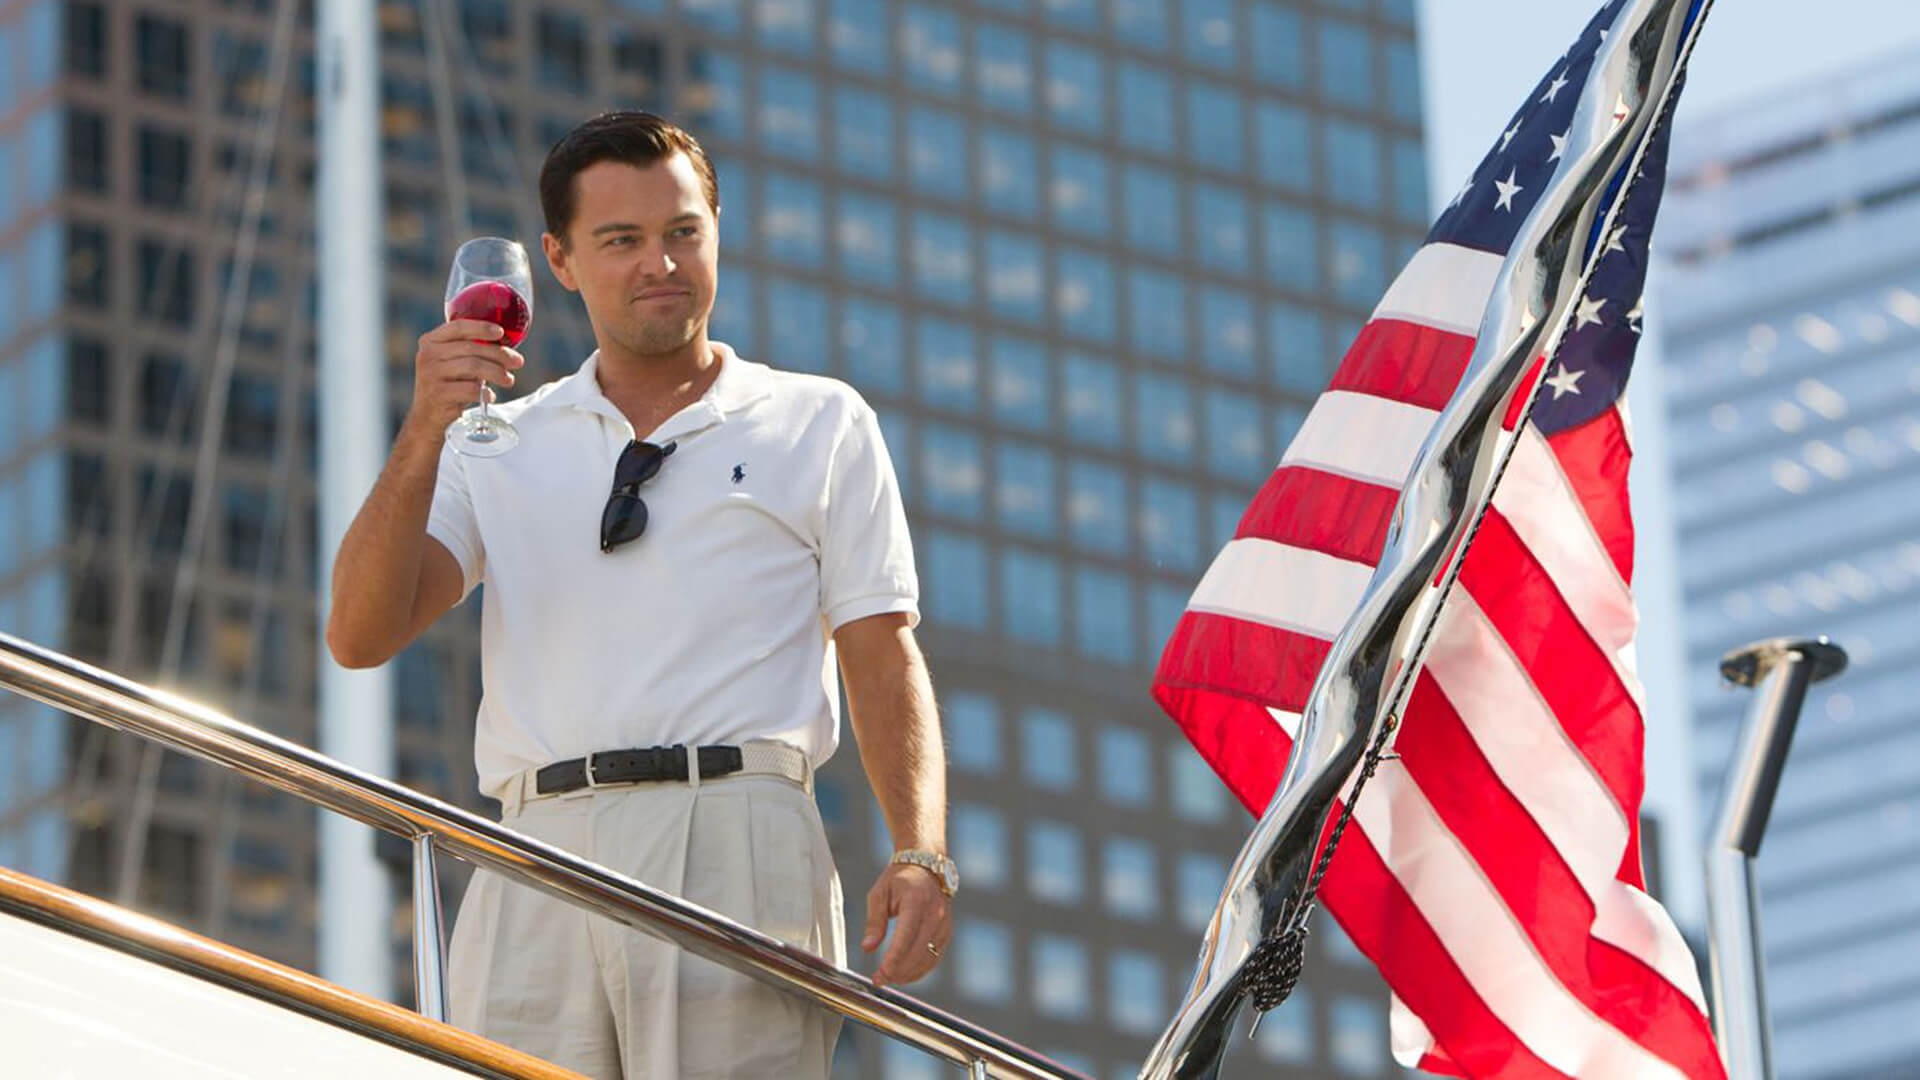 The Best Movies About Money of All Time